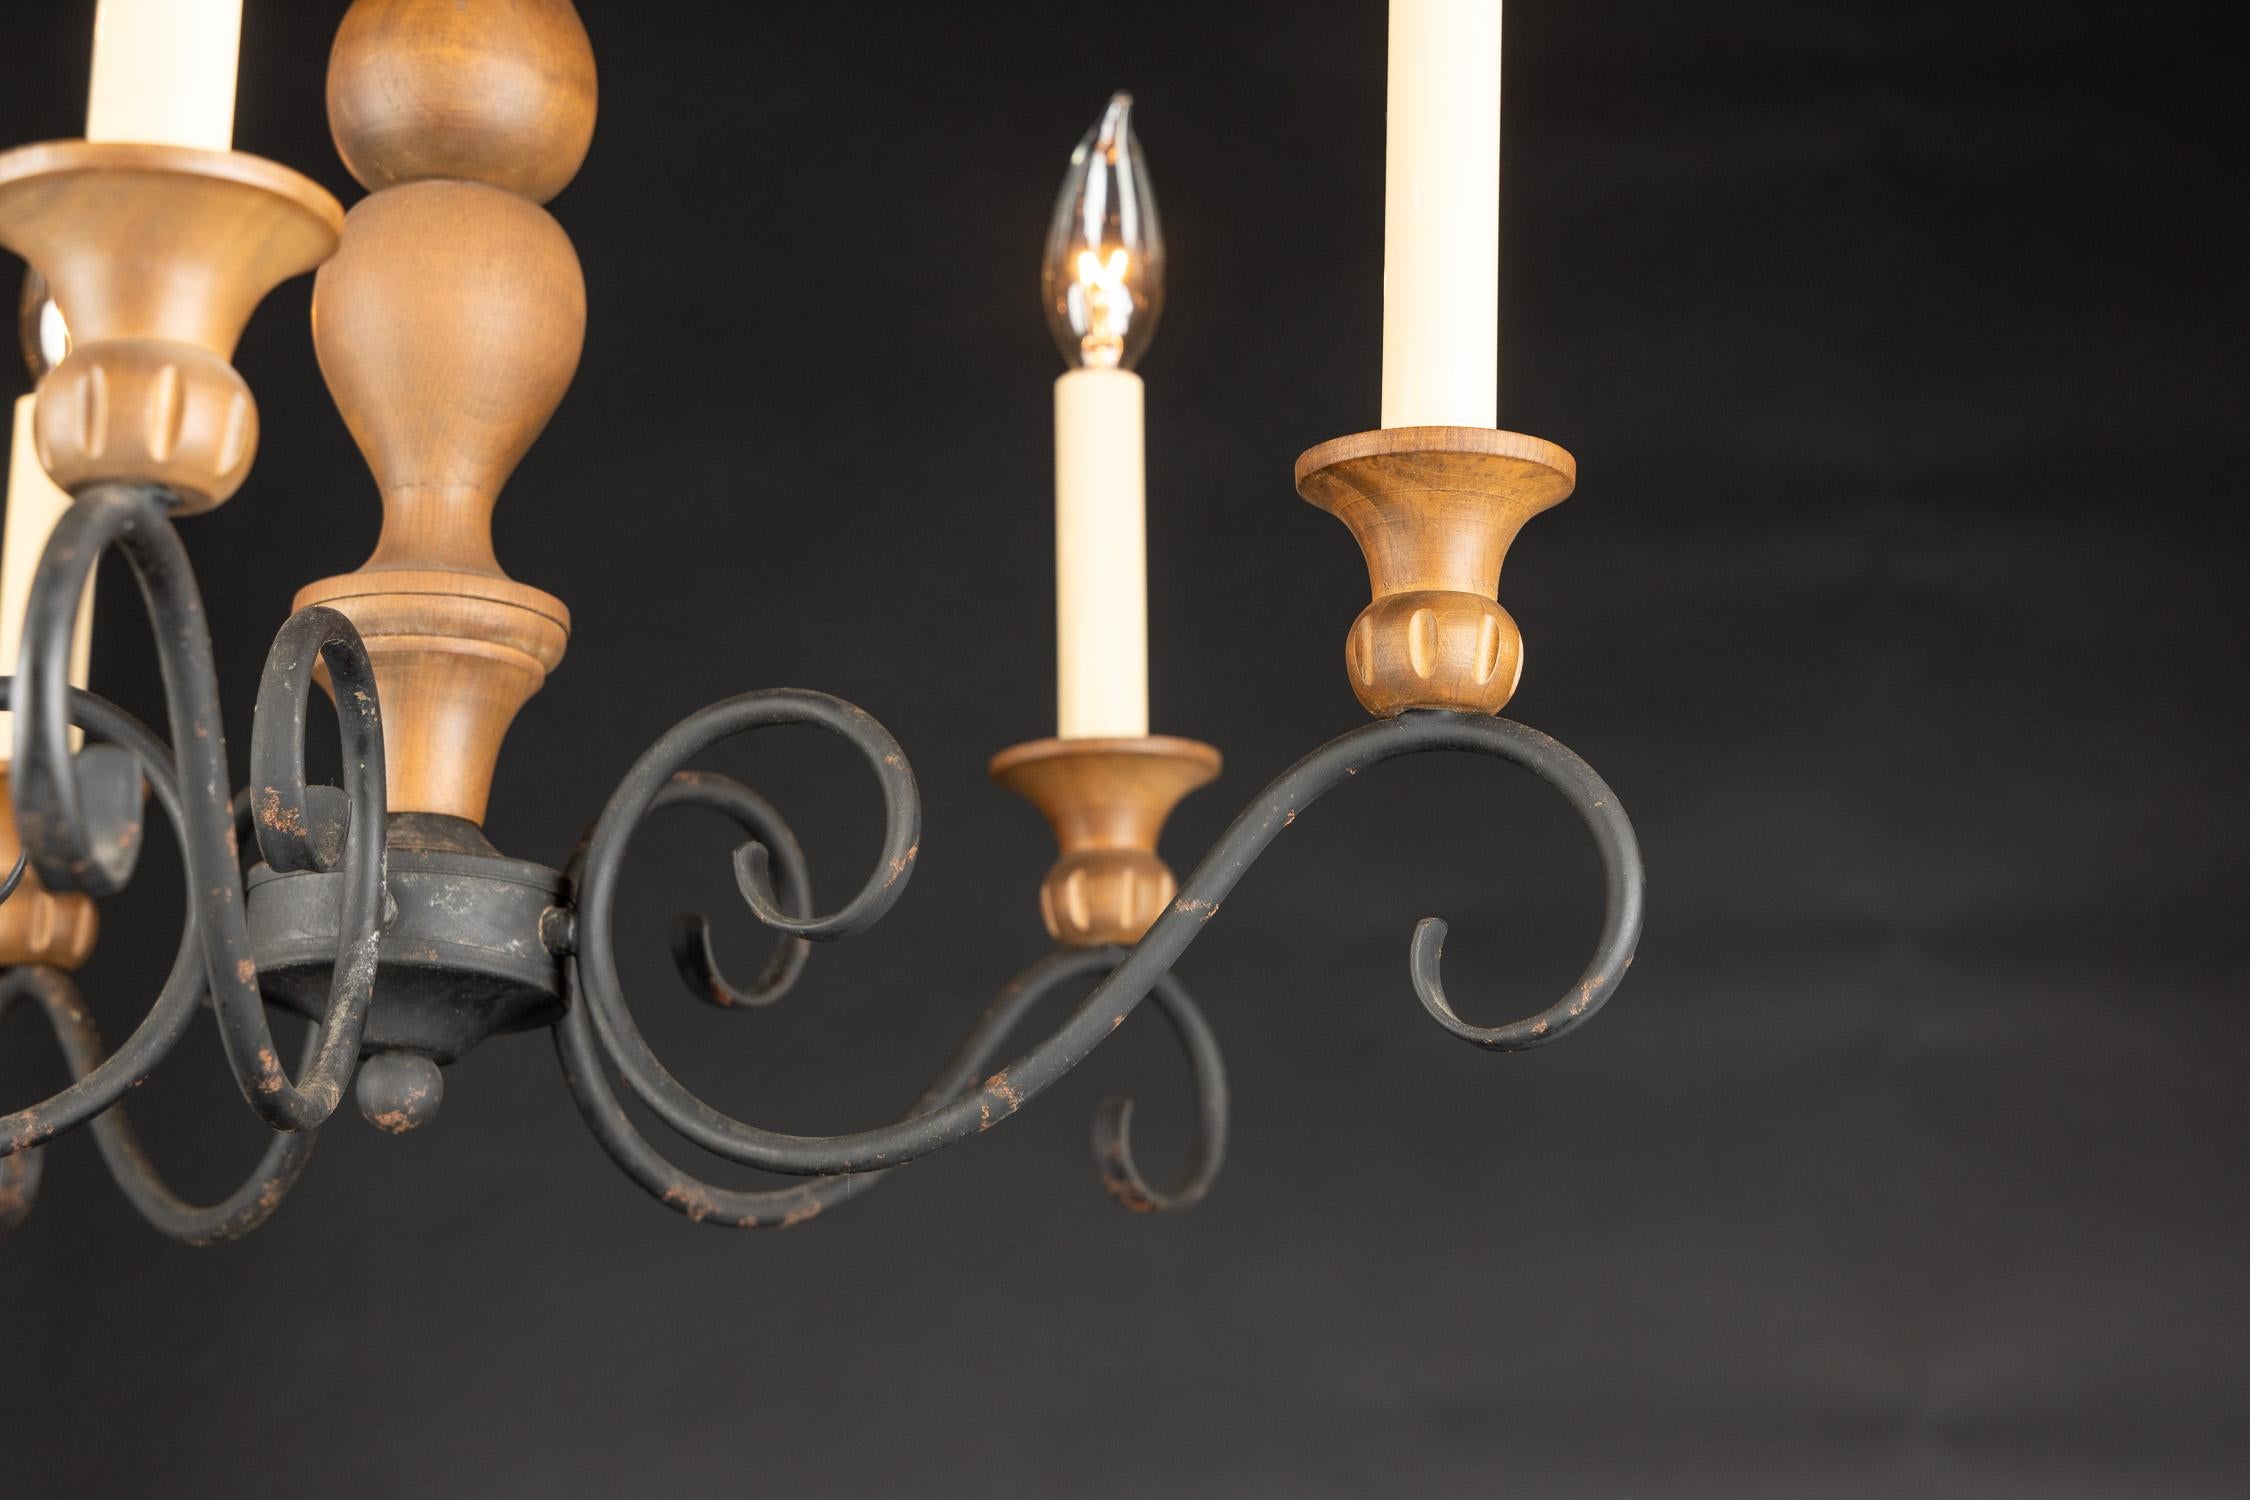 Unusual French late 19th century Louis XV country chandelier with iron scroll arms, carved wood candle cups, and a solid wood center, suspended by an iron hook at top.

Each piece in our shop is professionally rewired and in working order. They have